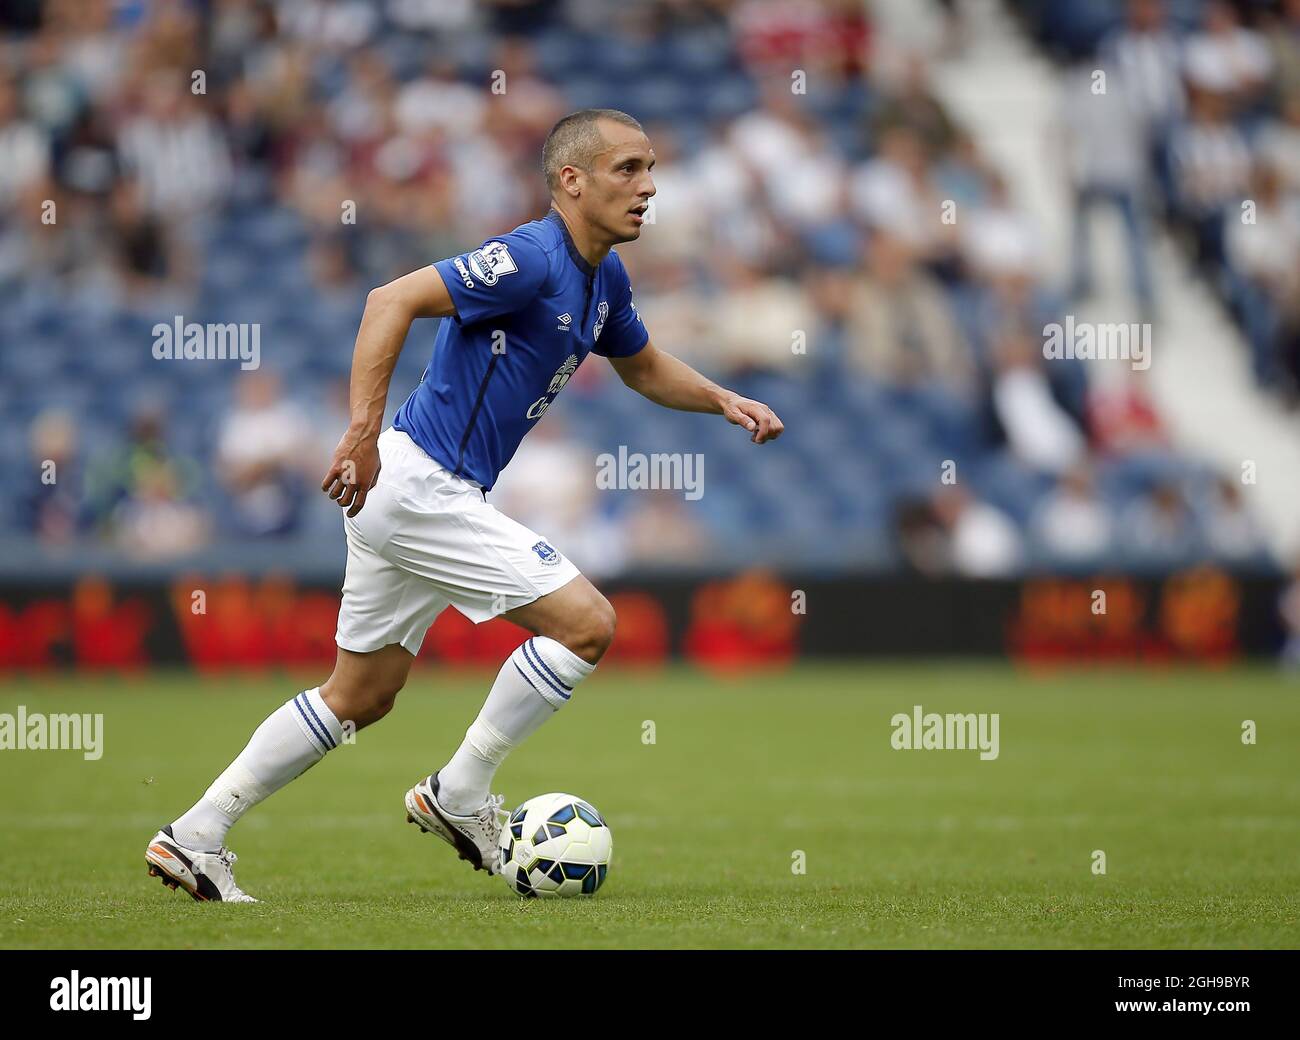 Leon Osman of Everton during their English Premier League soccer match at the Hawthorns in West Bromwich, central England, September 13, 2014. Stock Photo